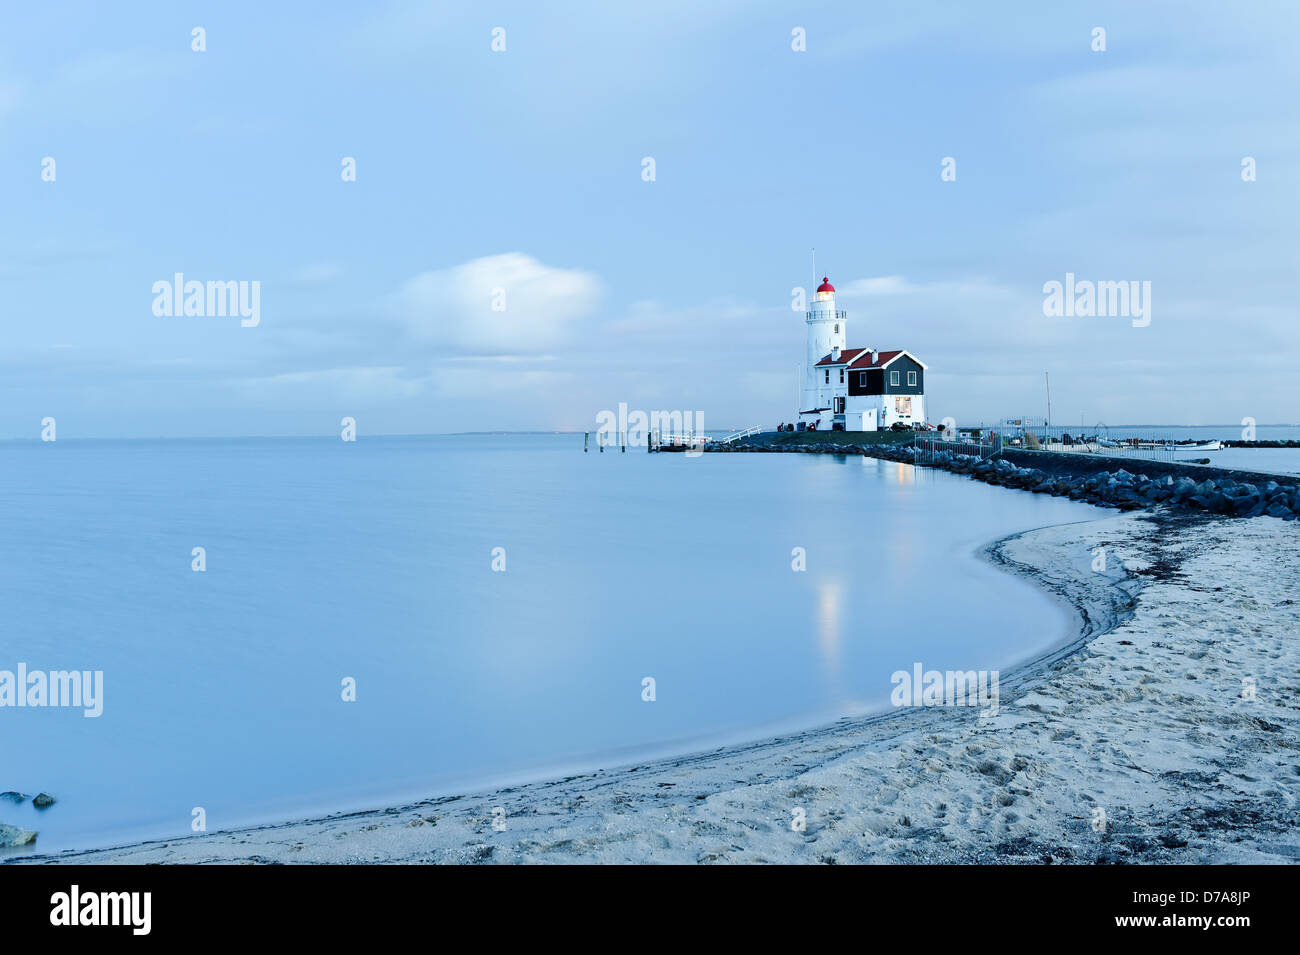 Paard van Marken or the Horse Lighthouse in Holland, Netherlands in the evening light Stock Photo